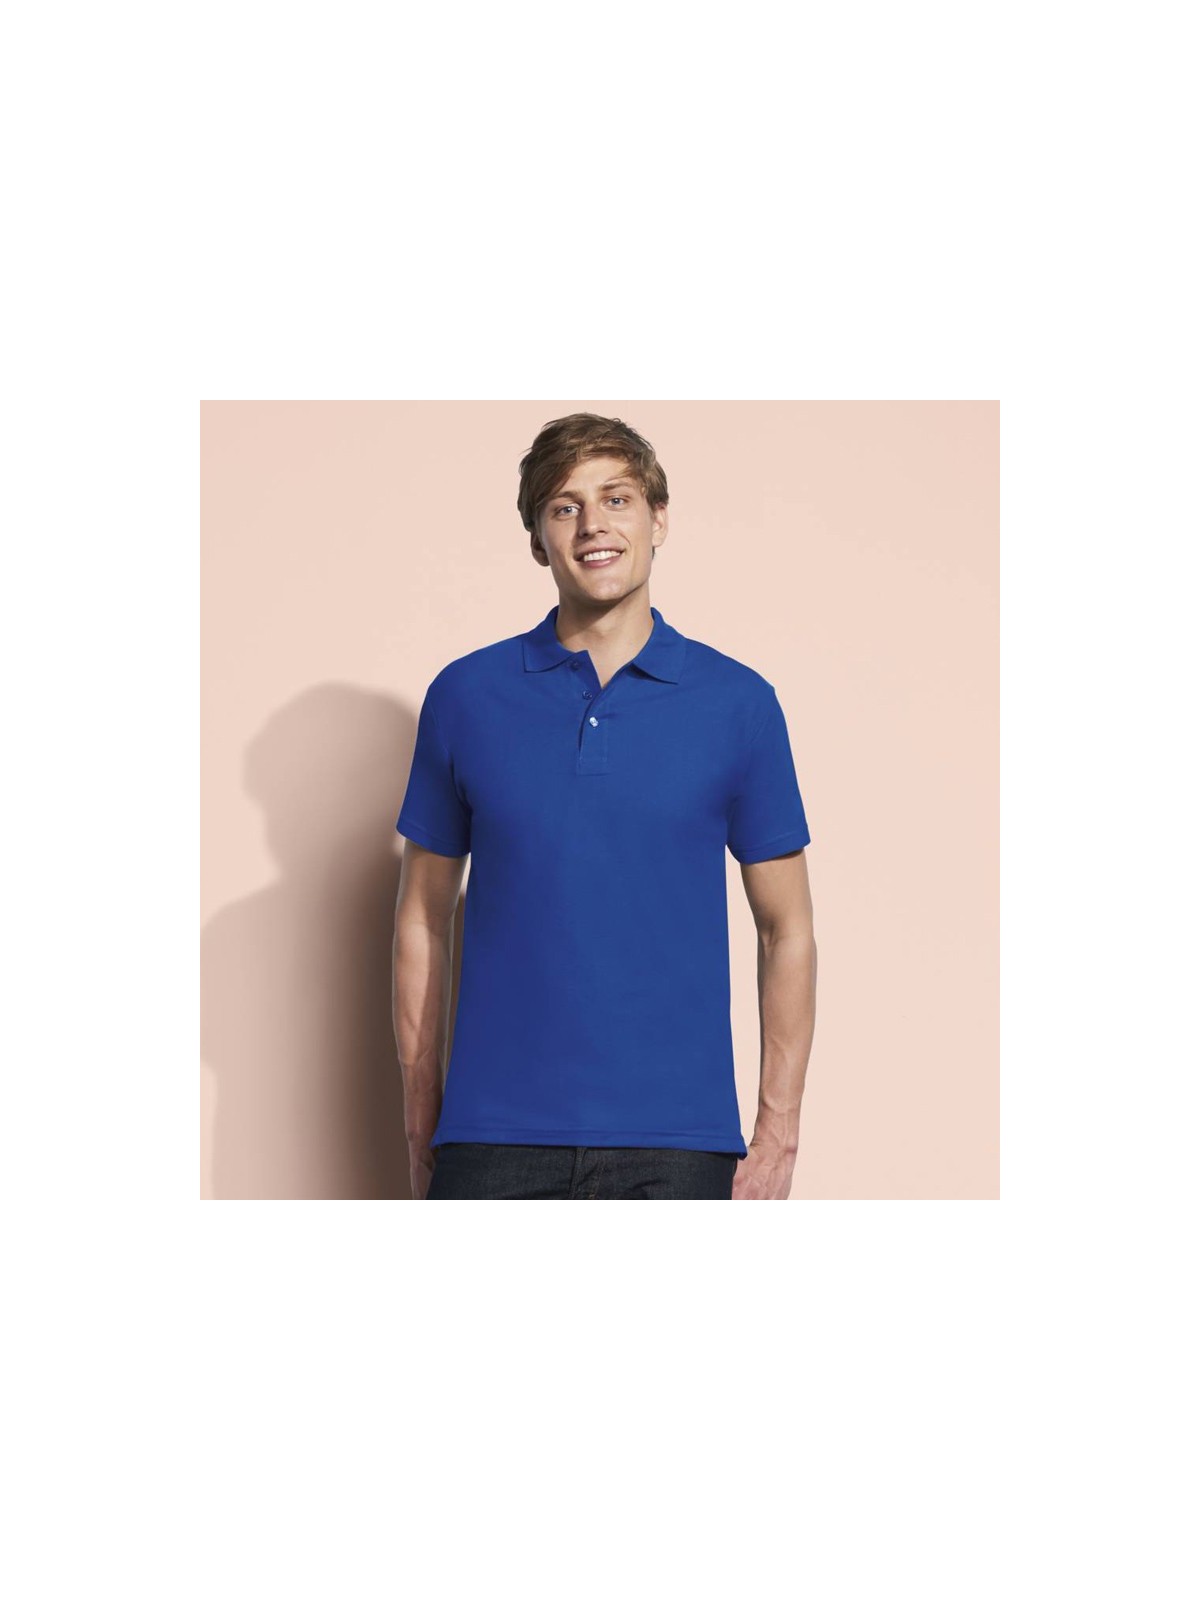 26-193 Polo homme Spring II personnalisé